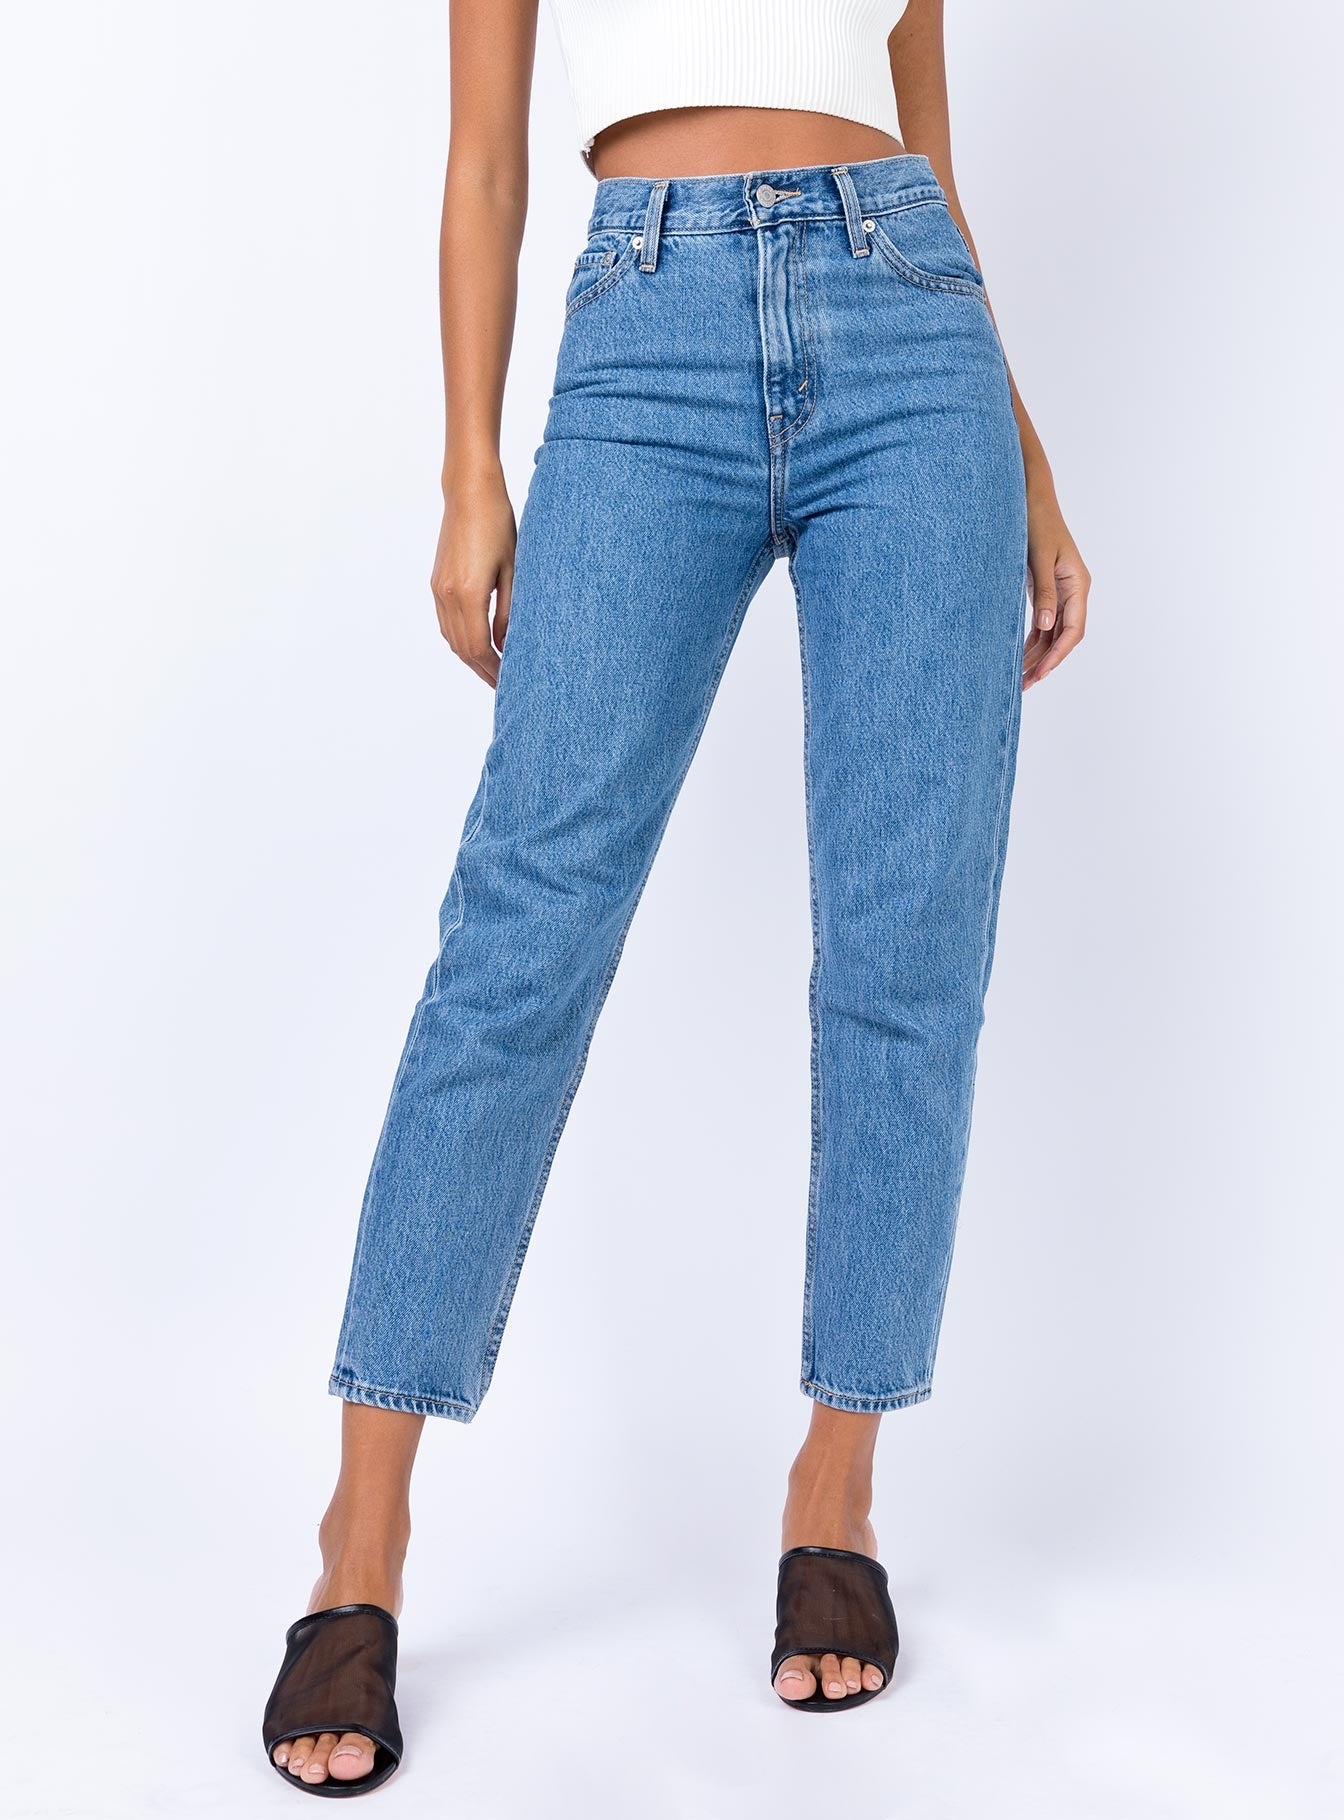 Levis Beverly Hills Mom Jeans